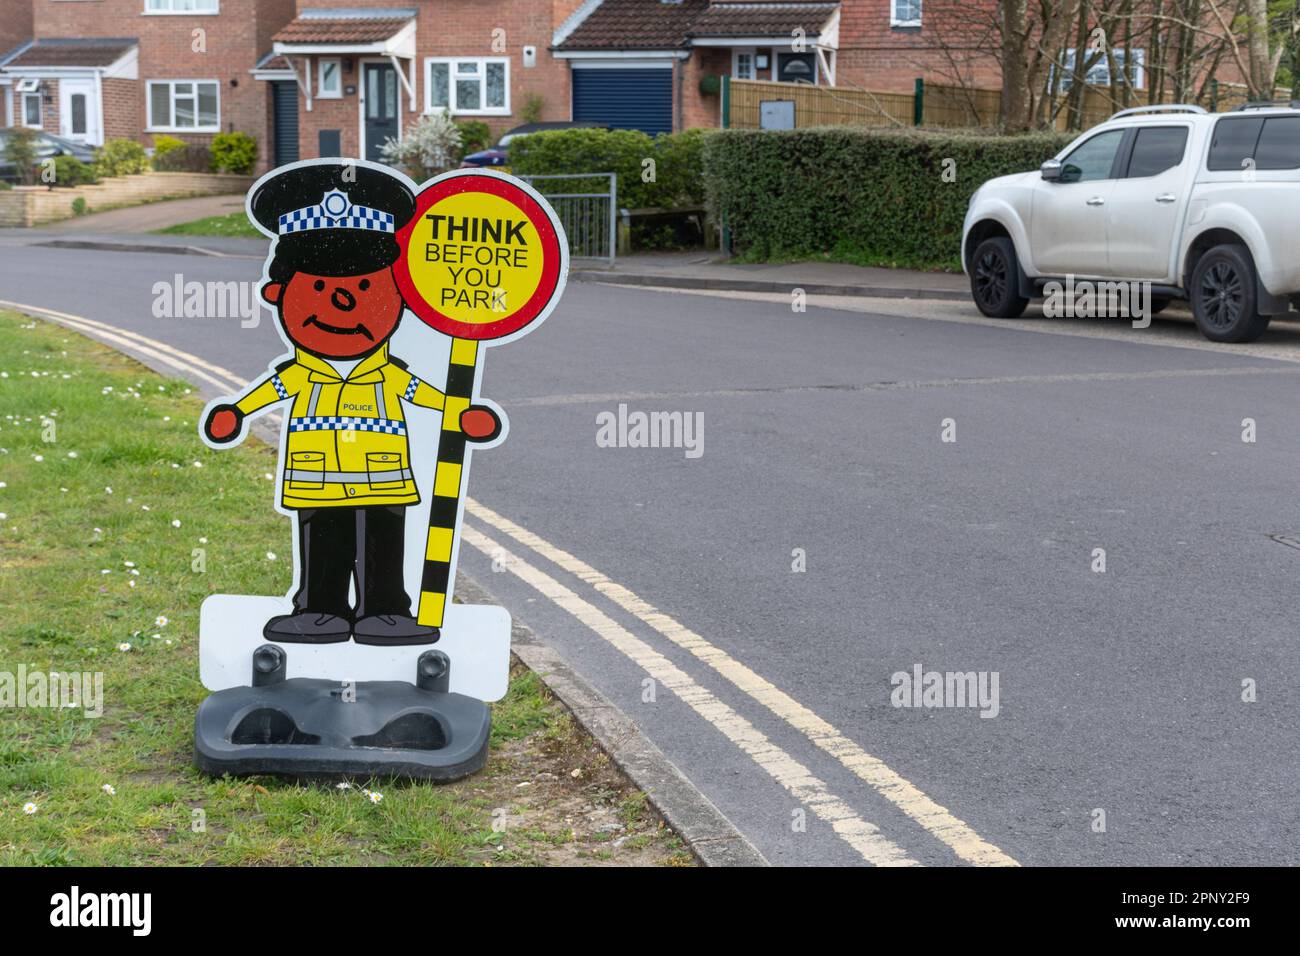 Amusing sign outside a school with a policeman and lollipop sign reading Think before you park, England, UK. Traffic safety at school drop off place Stock Photo